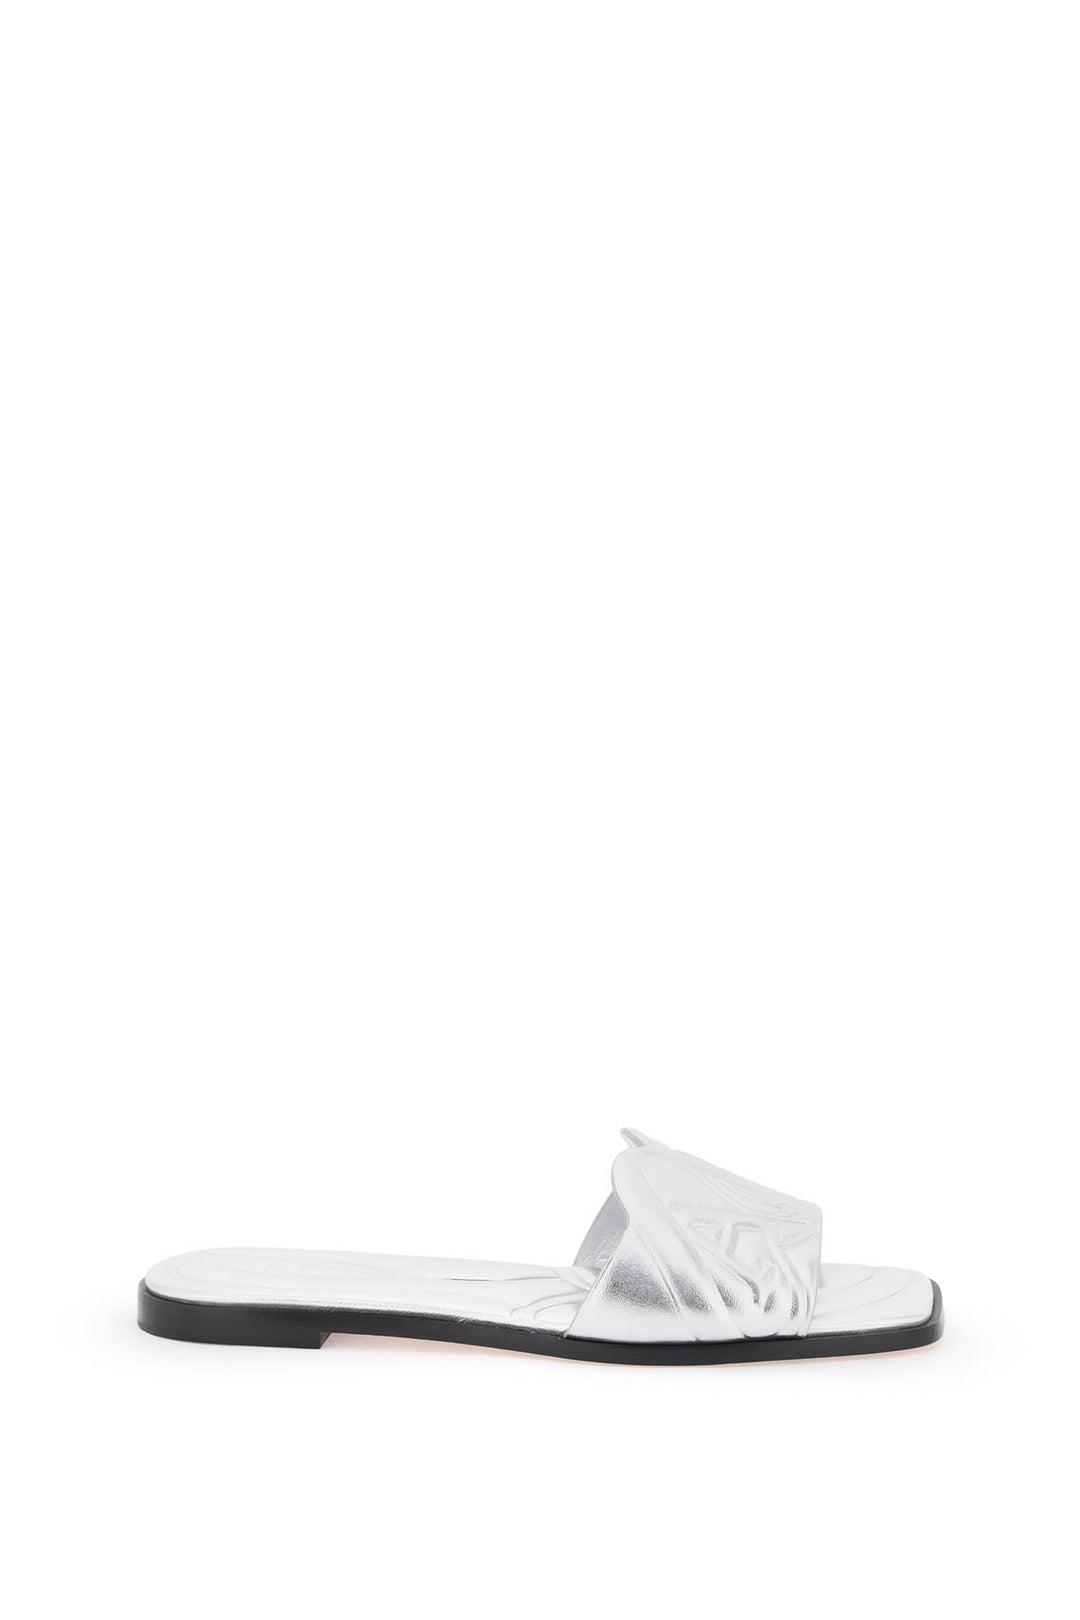 Alexander Mcqueen Laminated Leather Slides With Embossed Seal Logo   Argento